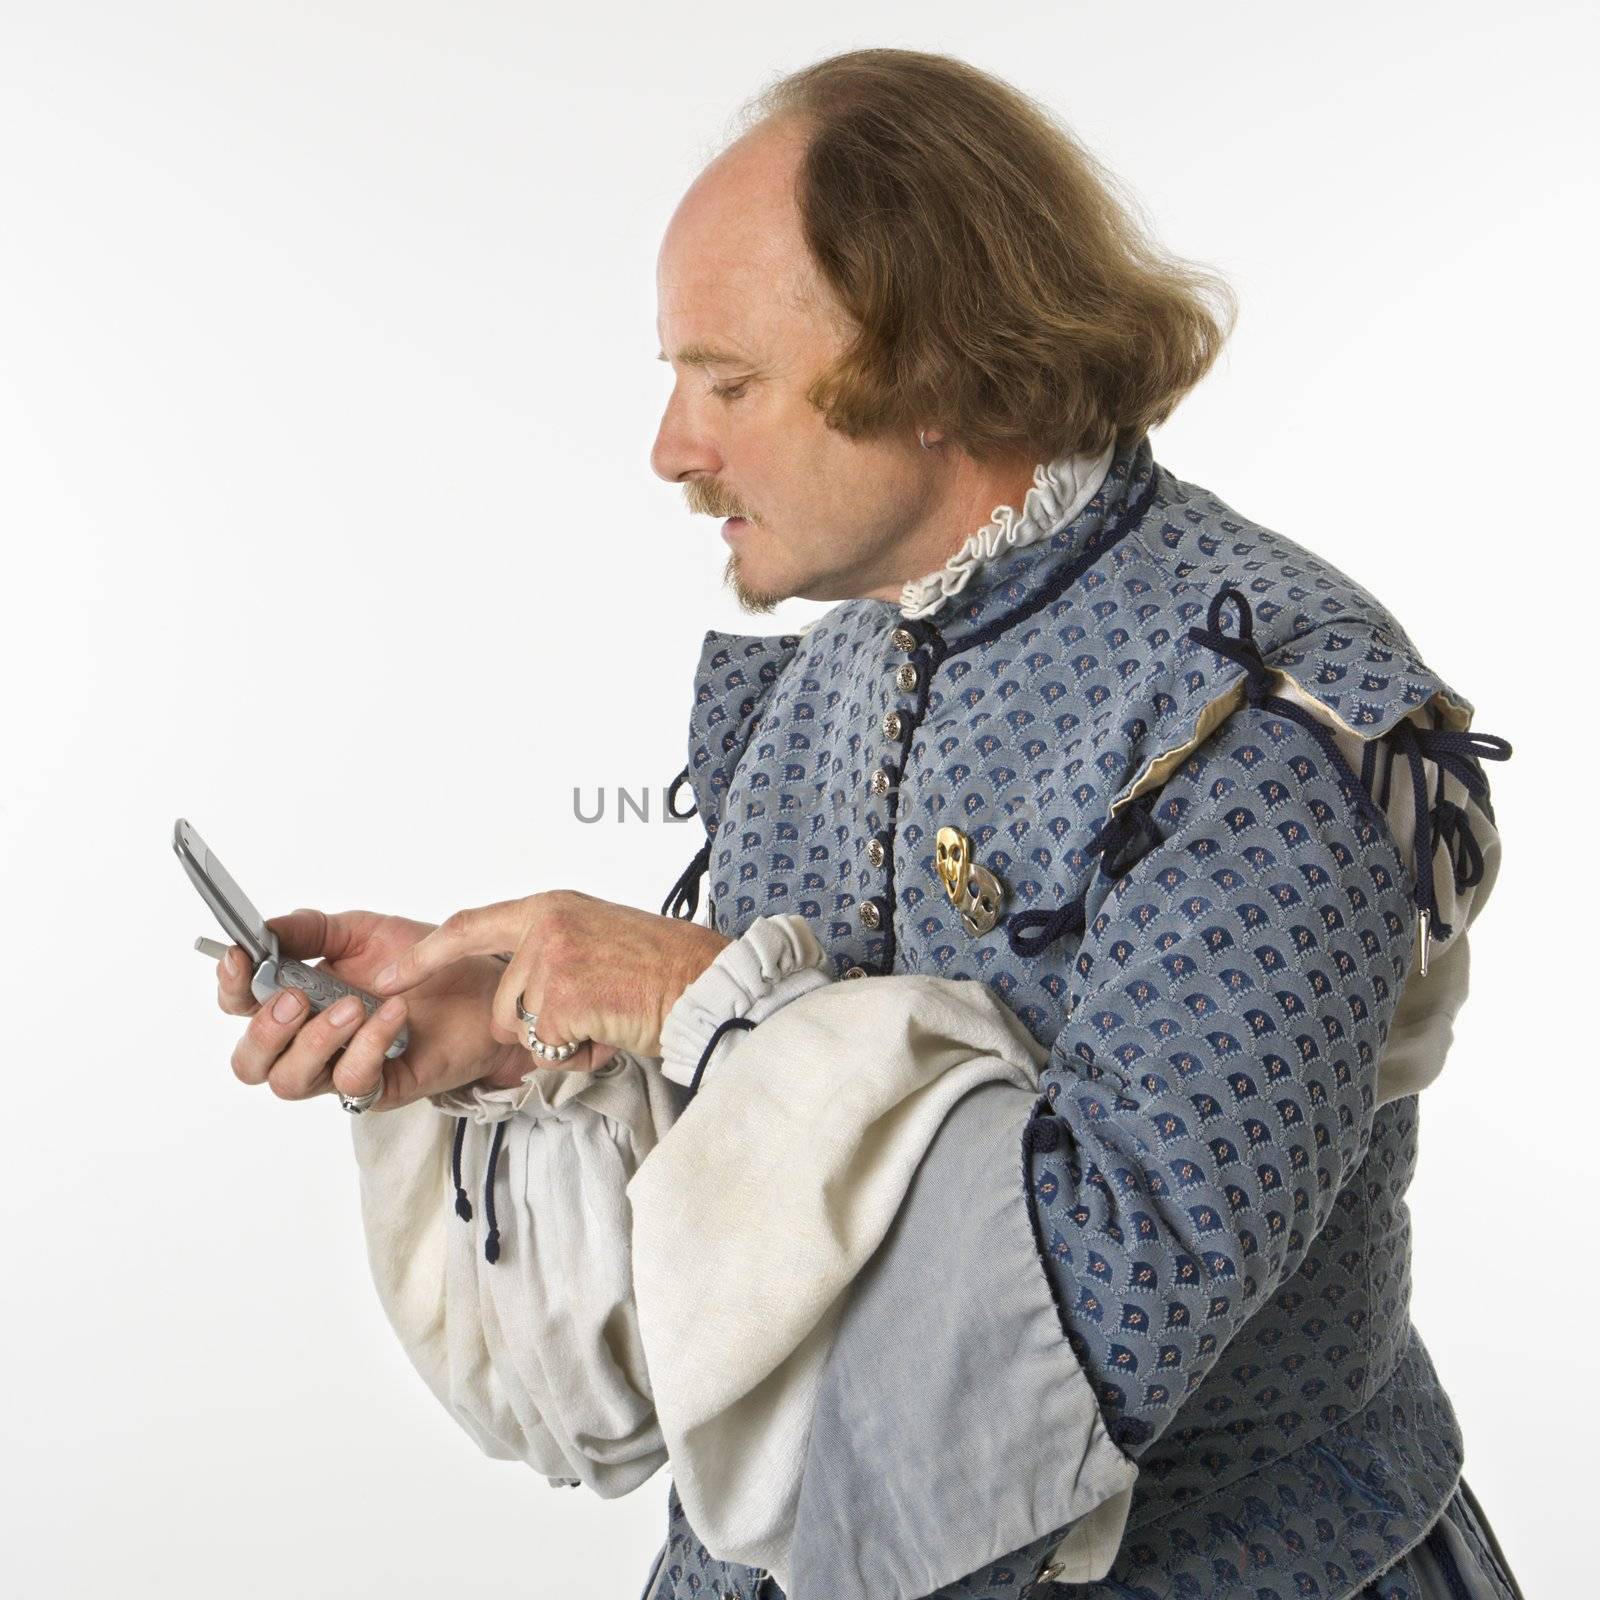 Shakespeare using cell phone. by iofoto